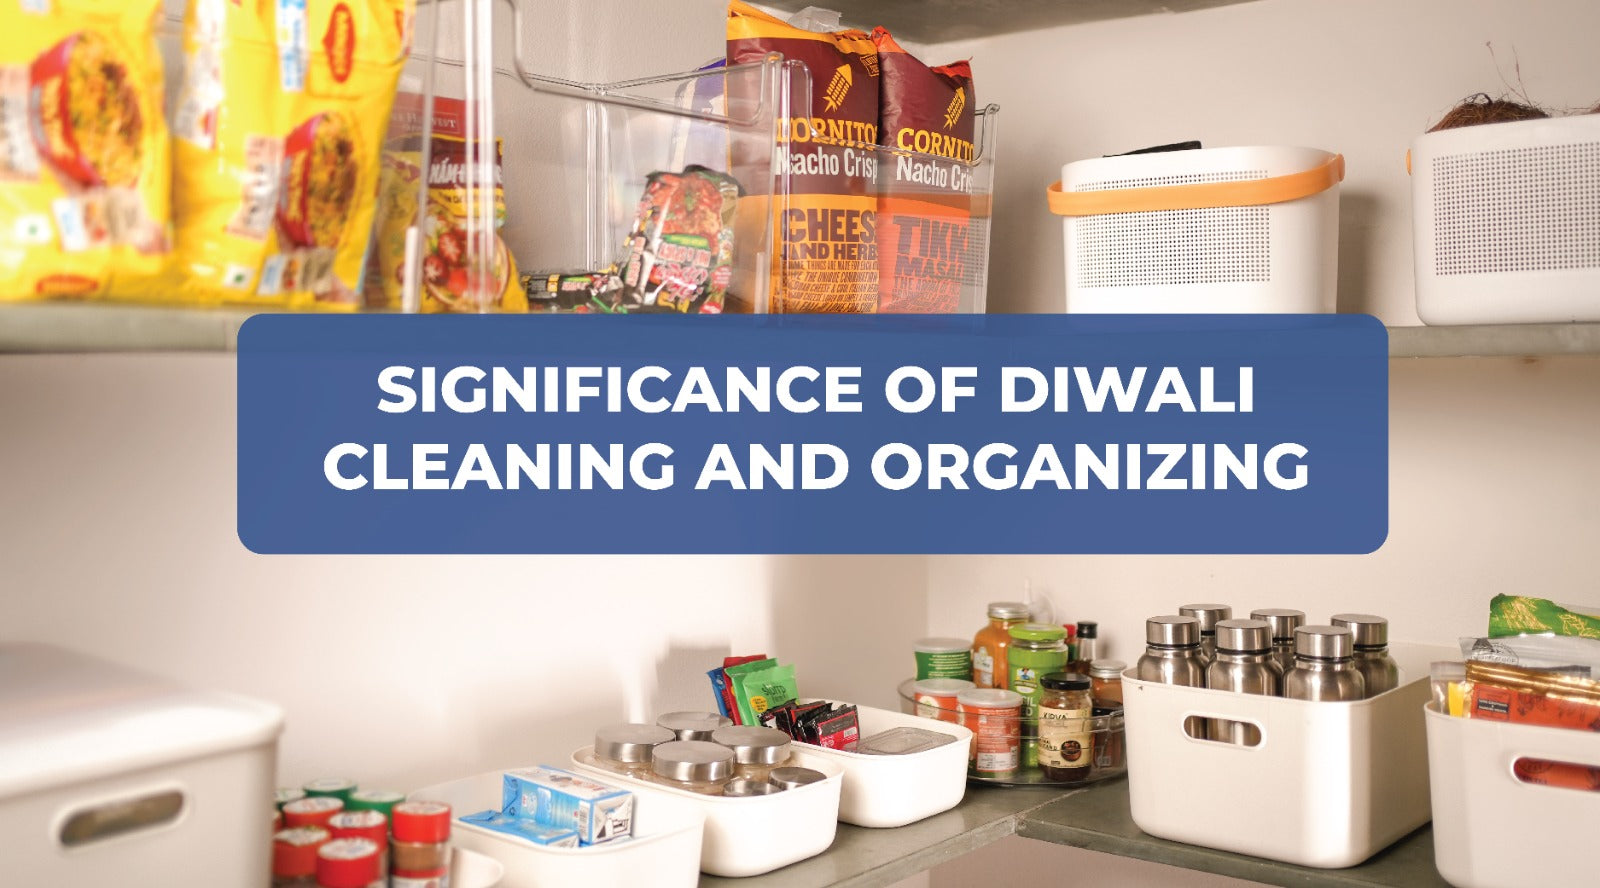 SIGNIFICANCE OF DIWALI CLEANING AND ORGANIZING